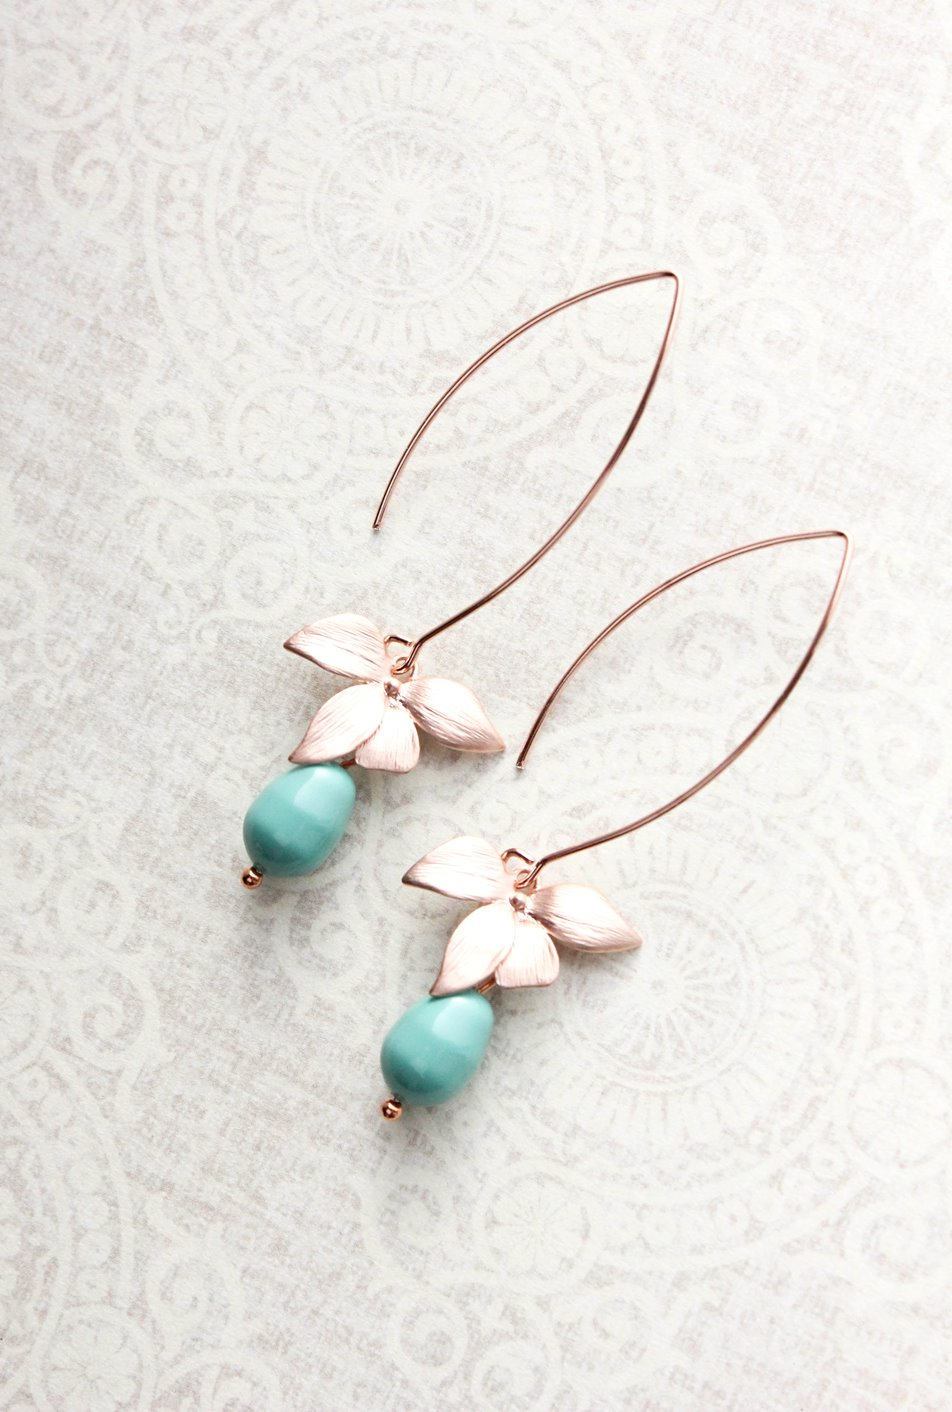 Rose Gold Orchid Earrings - Teal Pearl